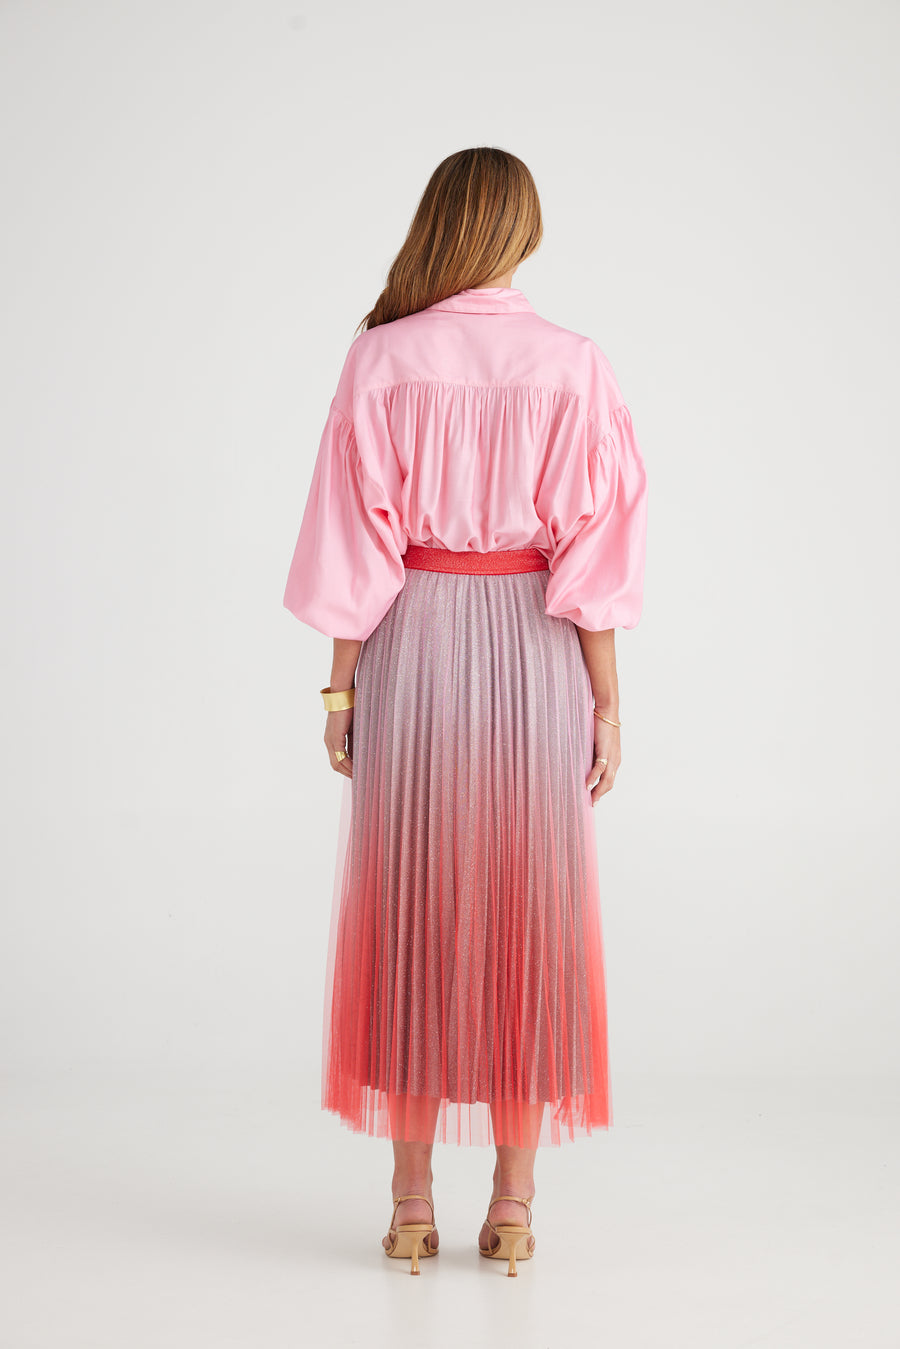 West End Skirt - Pink + Red